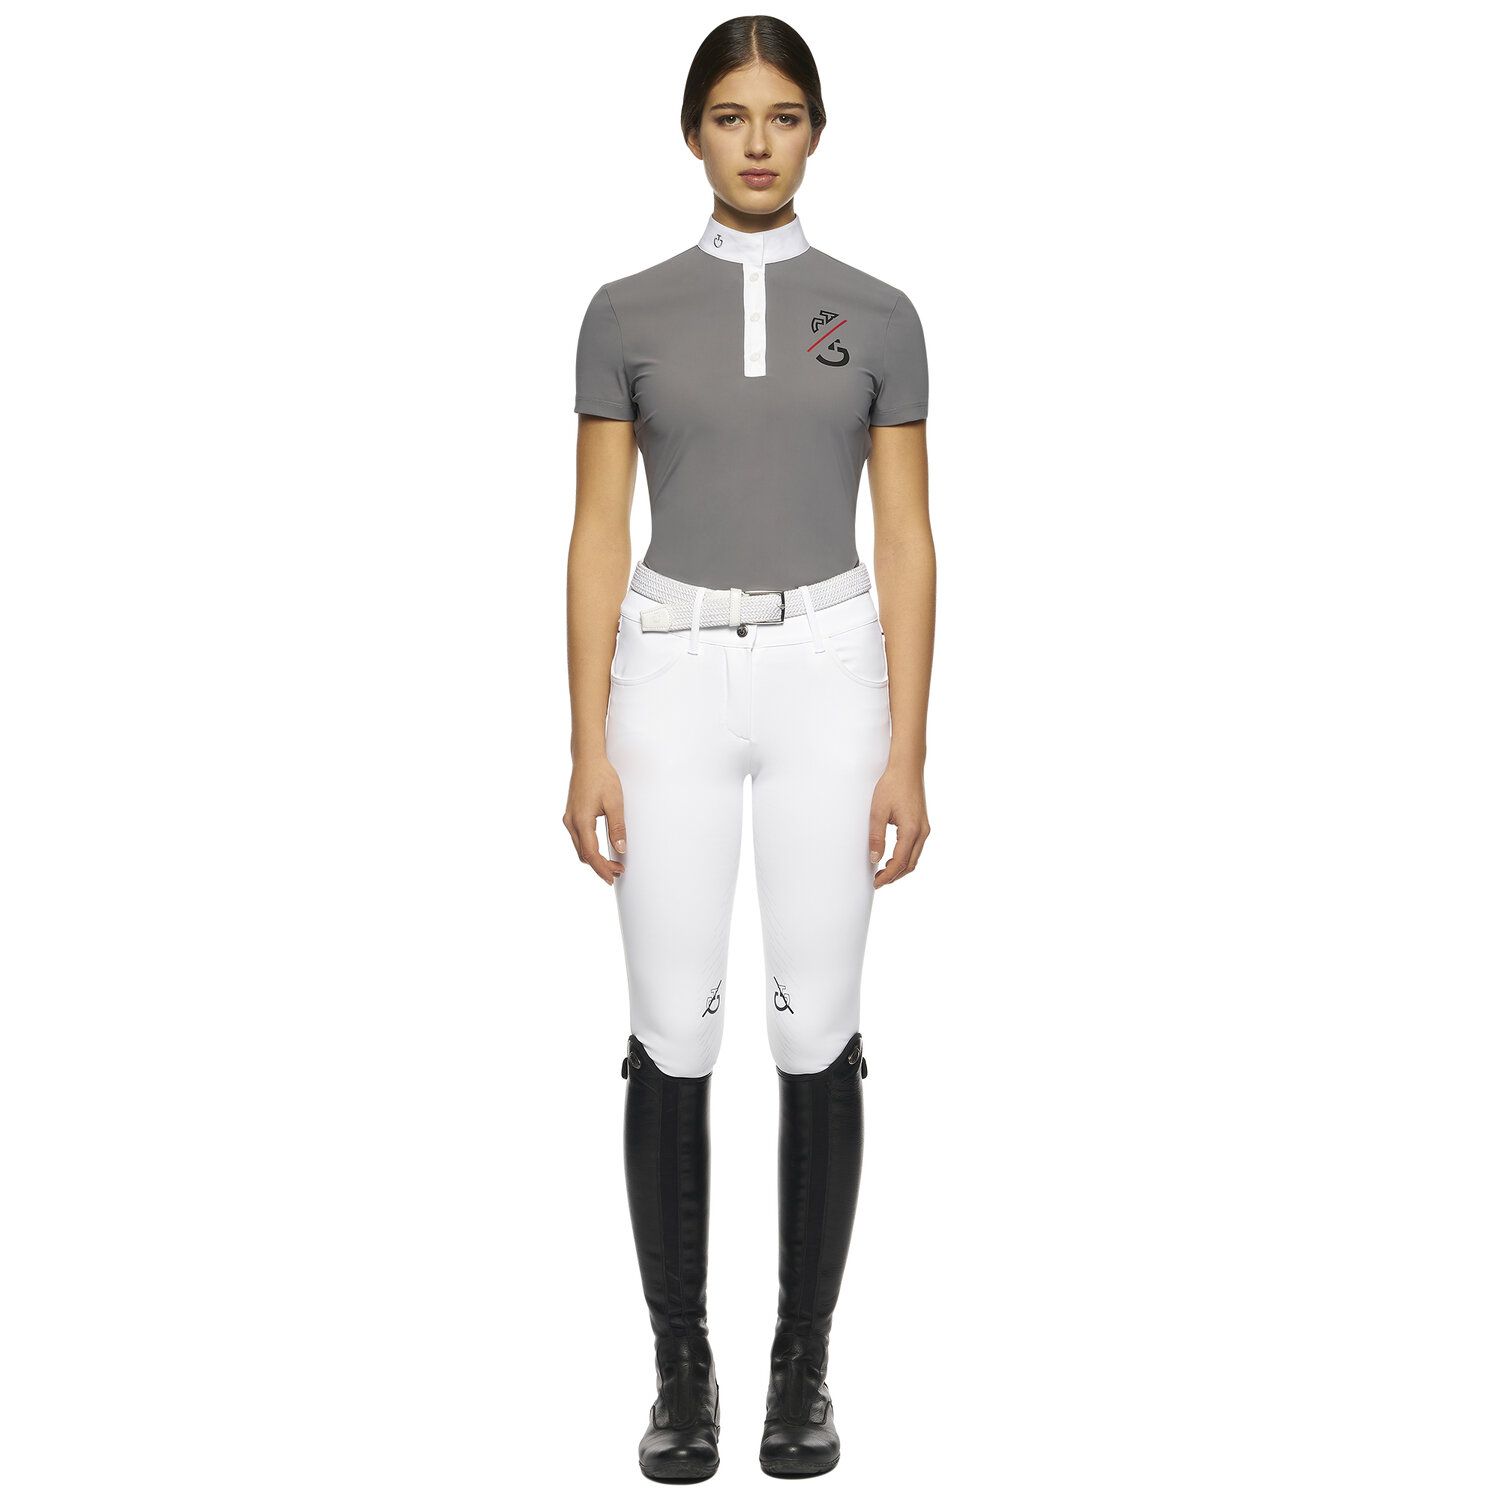 Women's CT Team Competition Polo